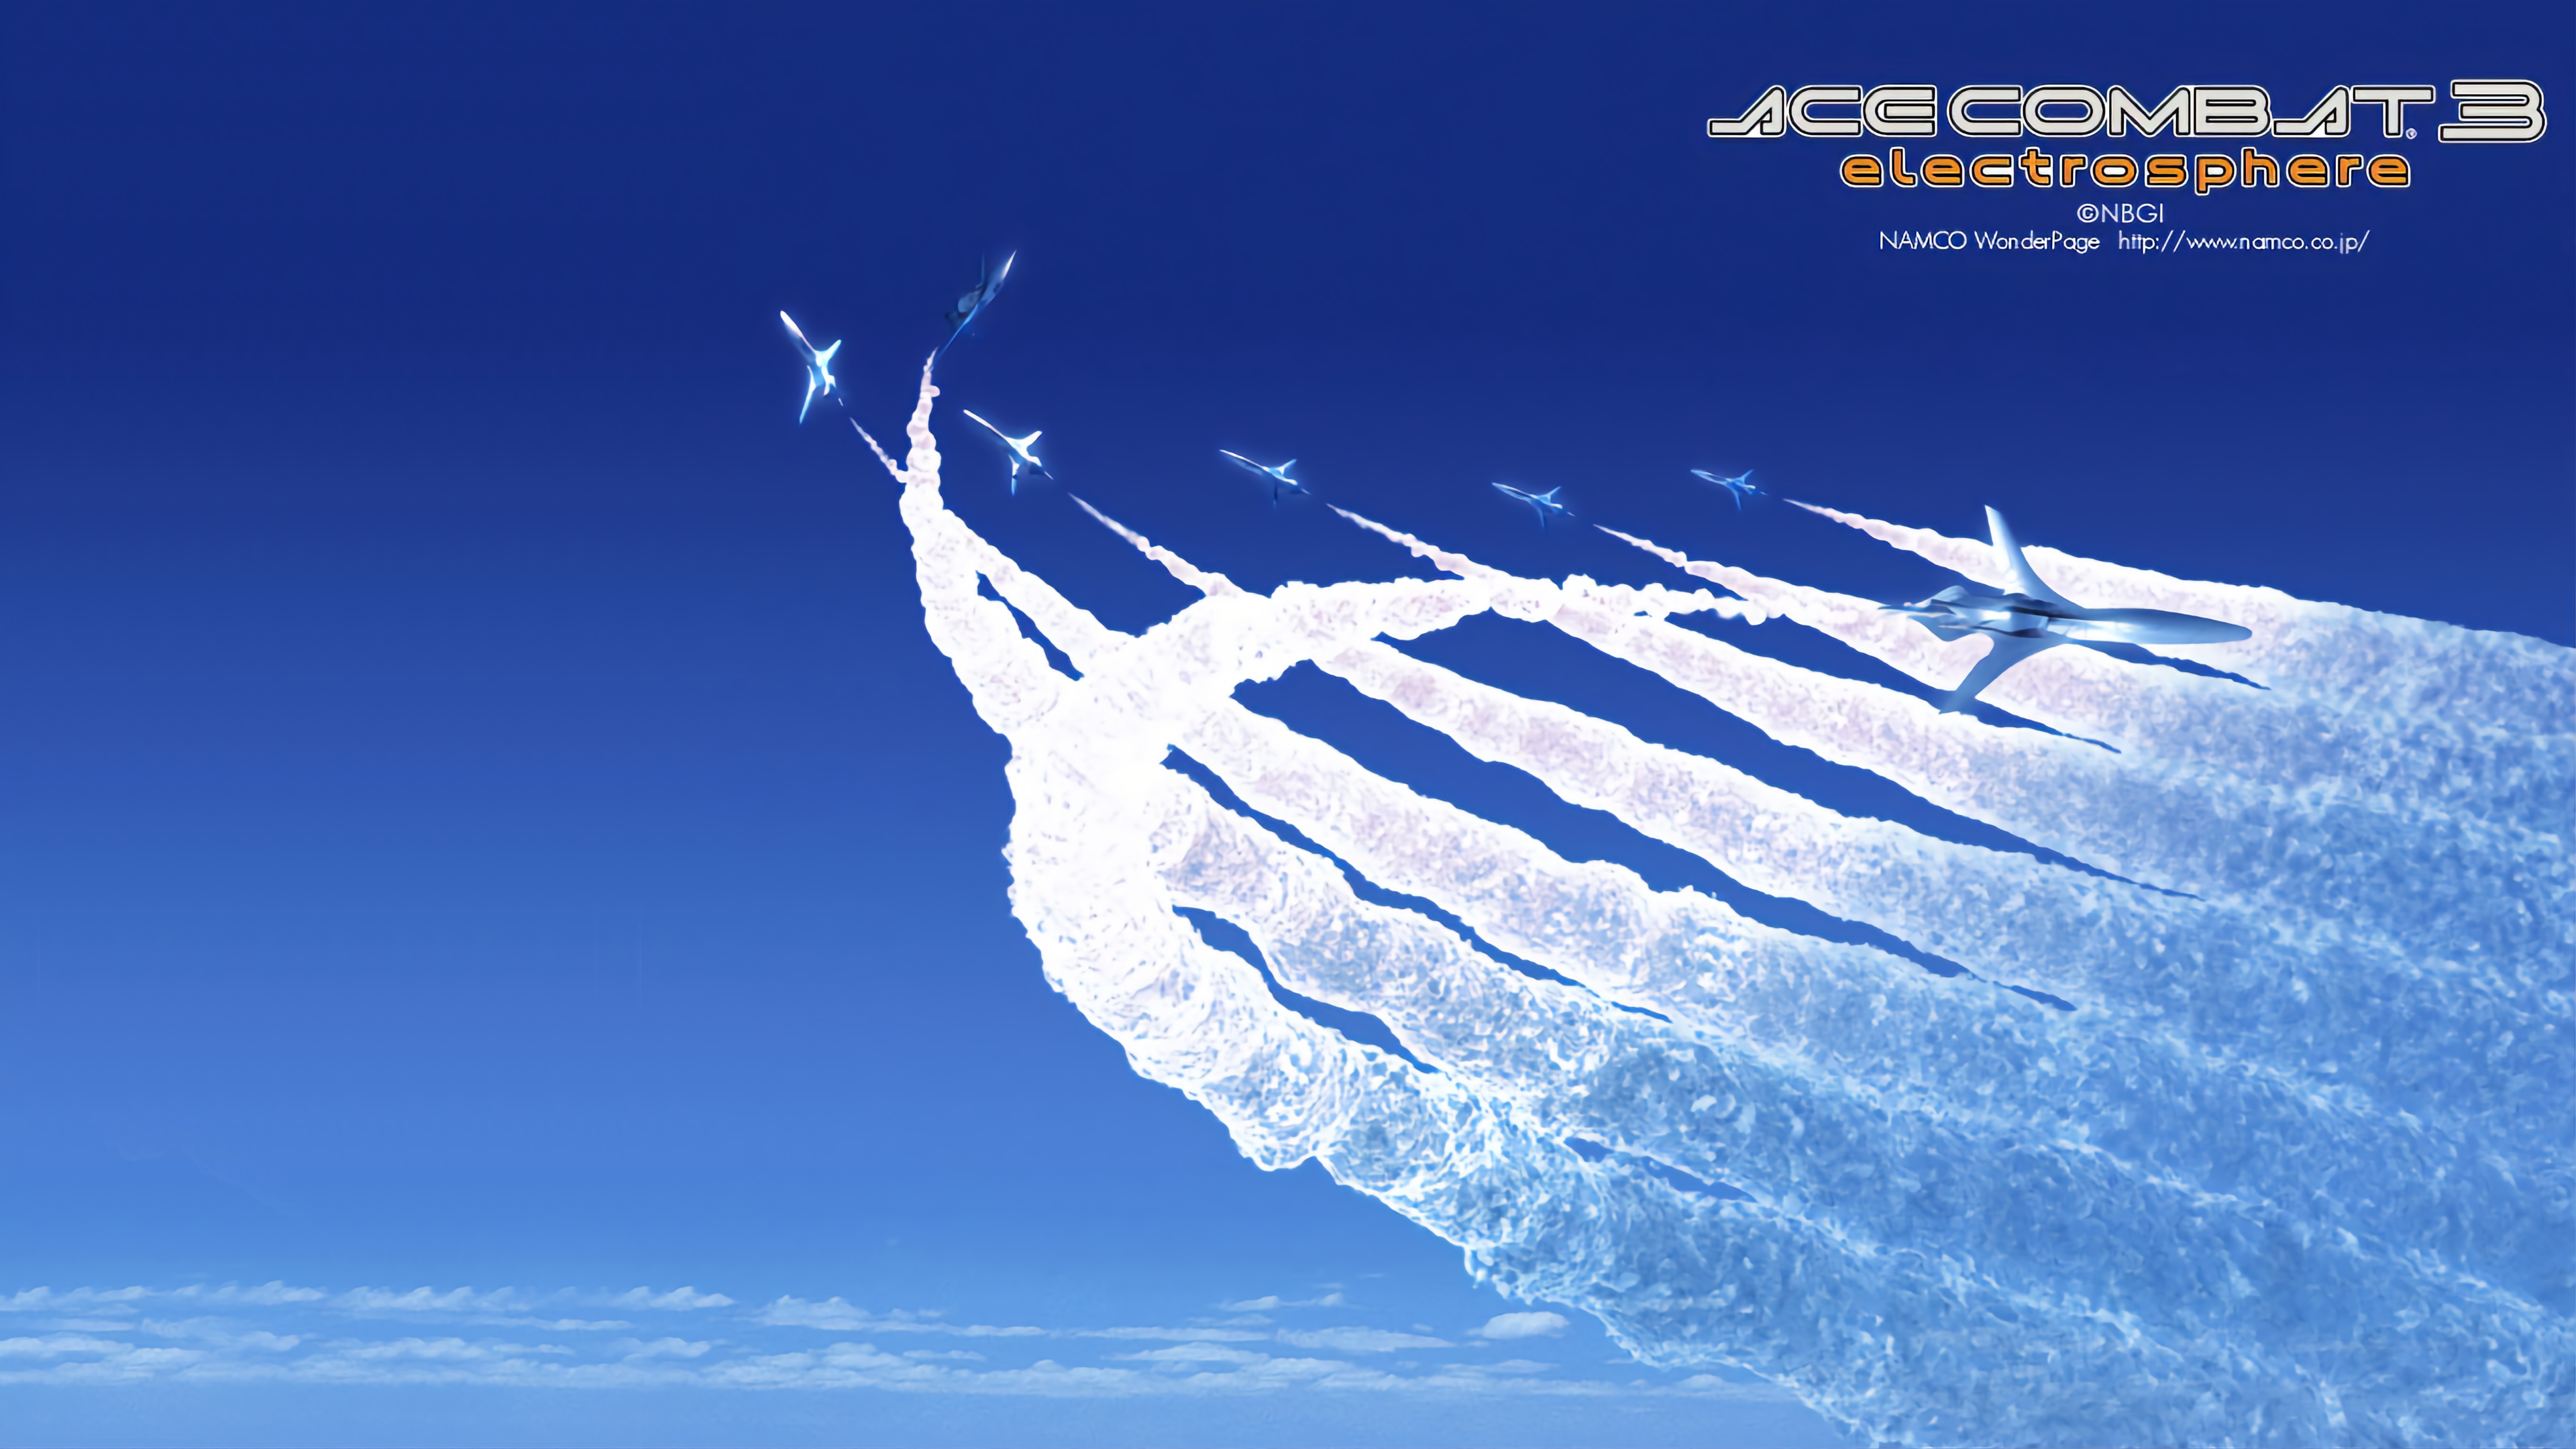 Namco's Official Ace Combat 3 Wallpaper, AI Upscaled To 4K